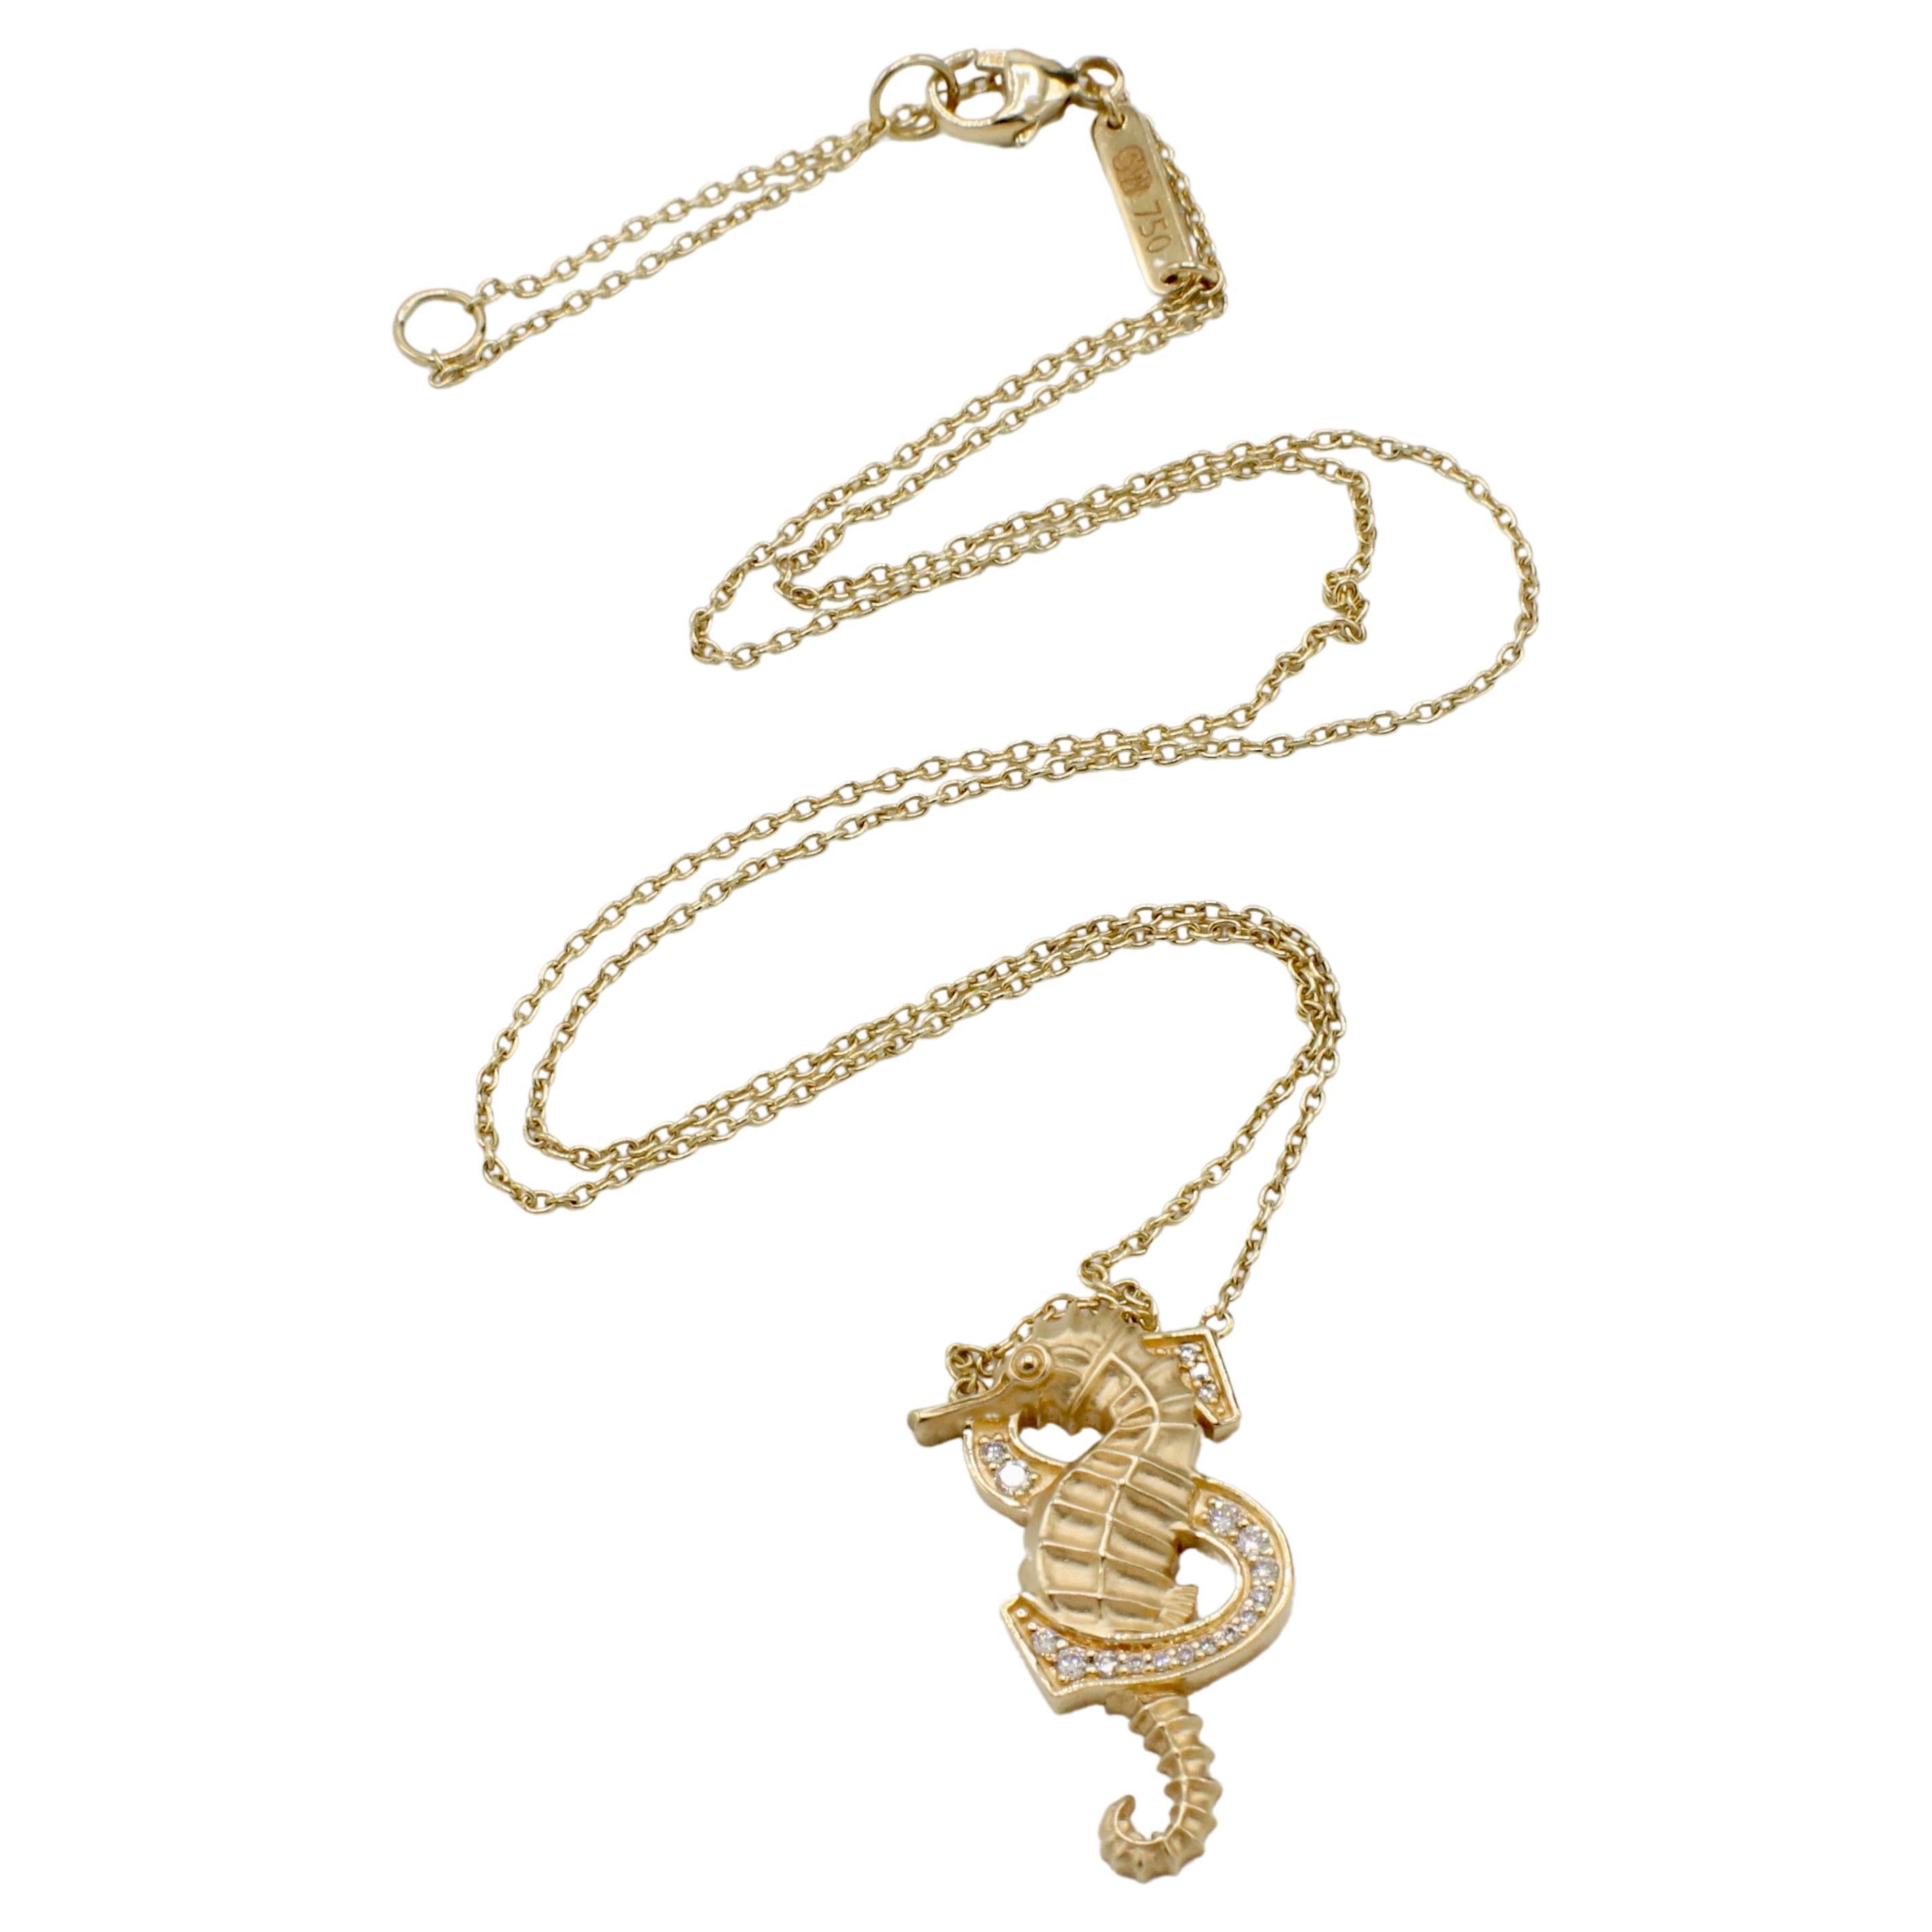 Stephen Webster Fish Tales S is for Seahorse Gold & Natural Diamond Necklace
Metal: 18k yellow gold
Weight: 3.79 grams
Diamonds: Approx. .07 CTW round natural diamonds G VS
Dimensions: 21 x 12mm
Chain length: 16.5 inches
Retail: $1,500 USD